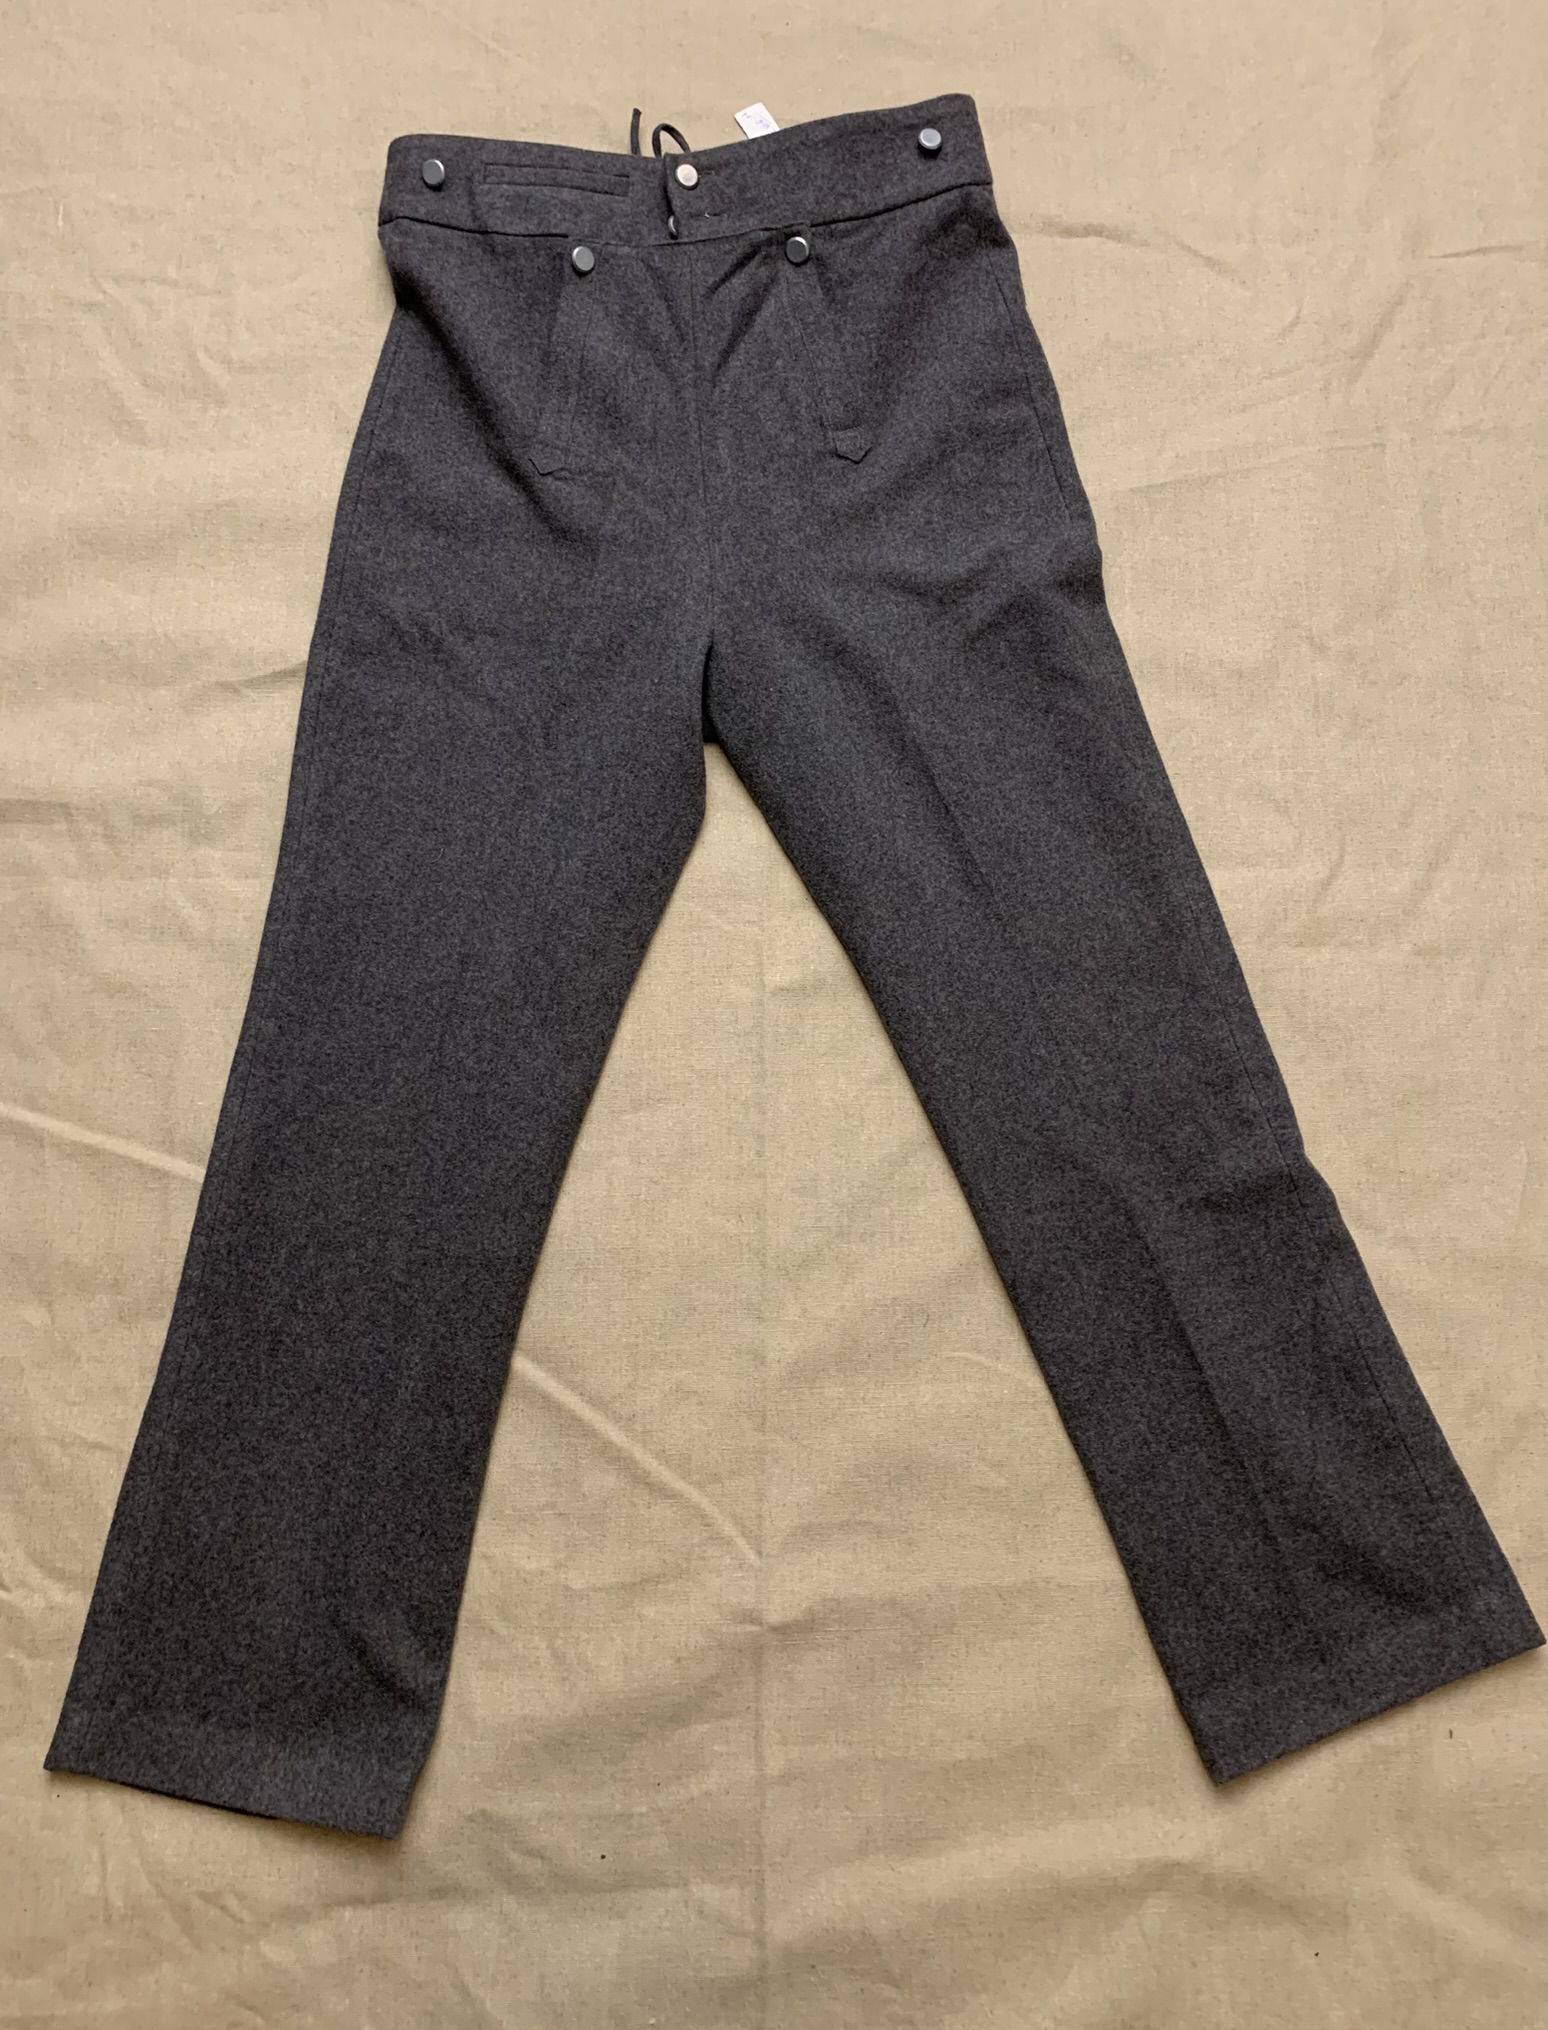 Norwegian Uniform Trousers late 18th Century and early 19th Century ...